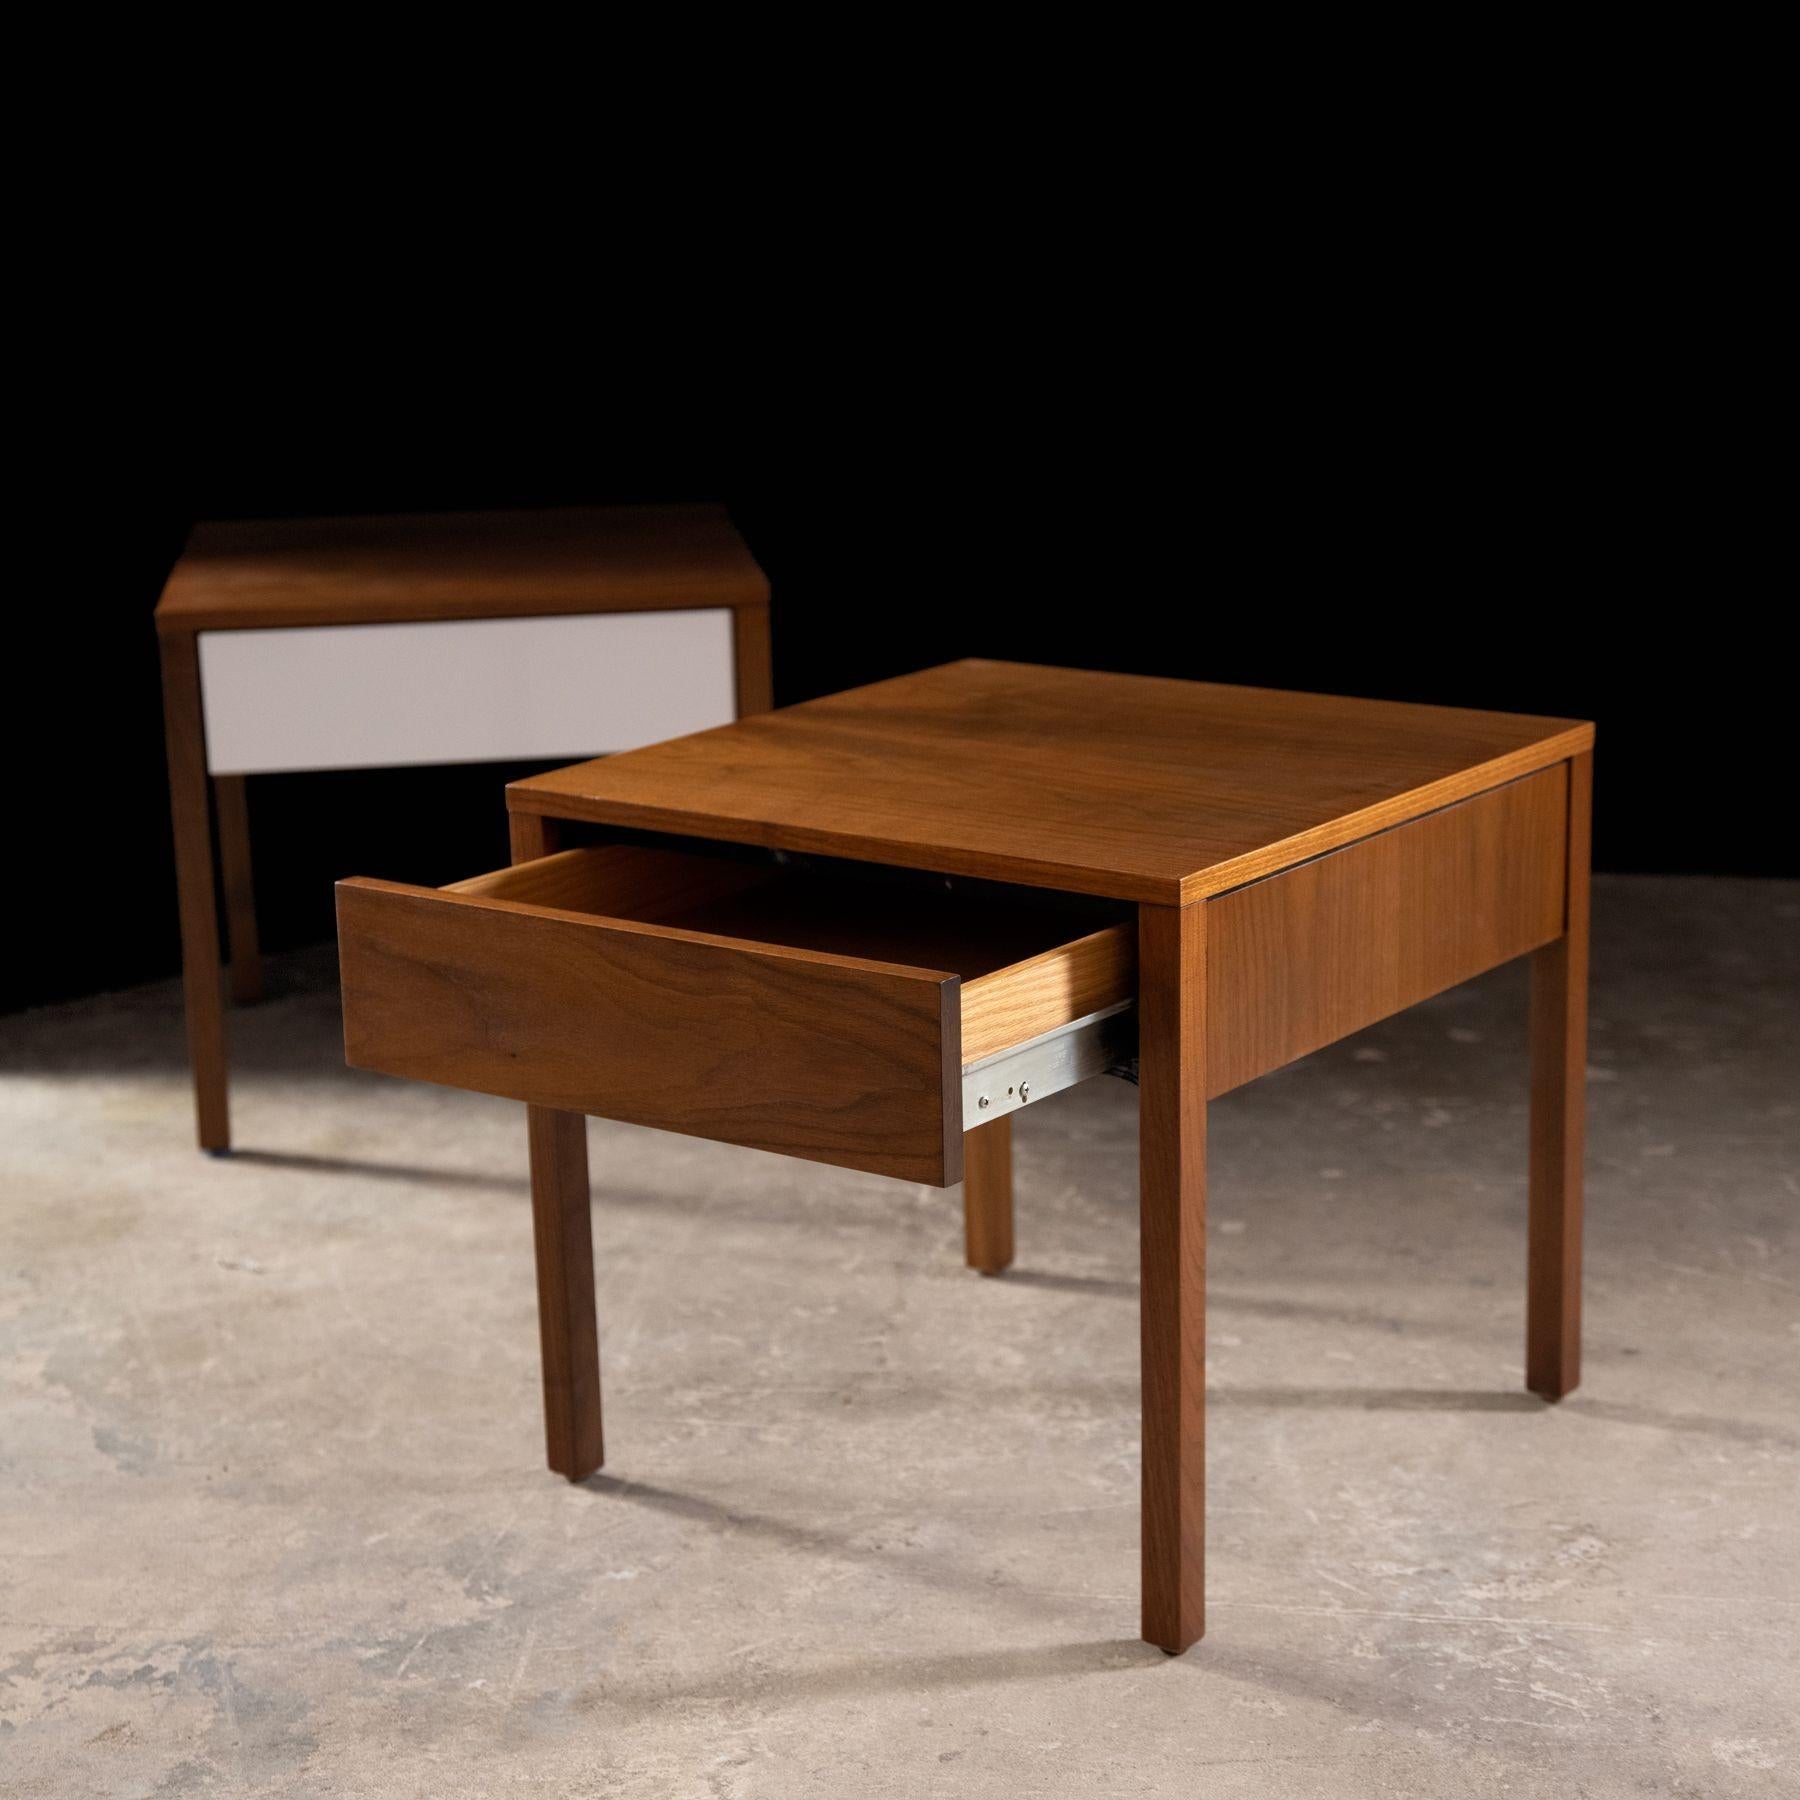 Early production nightstands model 227 designed by Florence Knoll for Knoll Associates, 1956. Nightstands are constructed of walnut and retain the early Knoll label. Both are in excellent condition and have been professionally refinished.